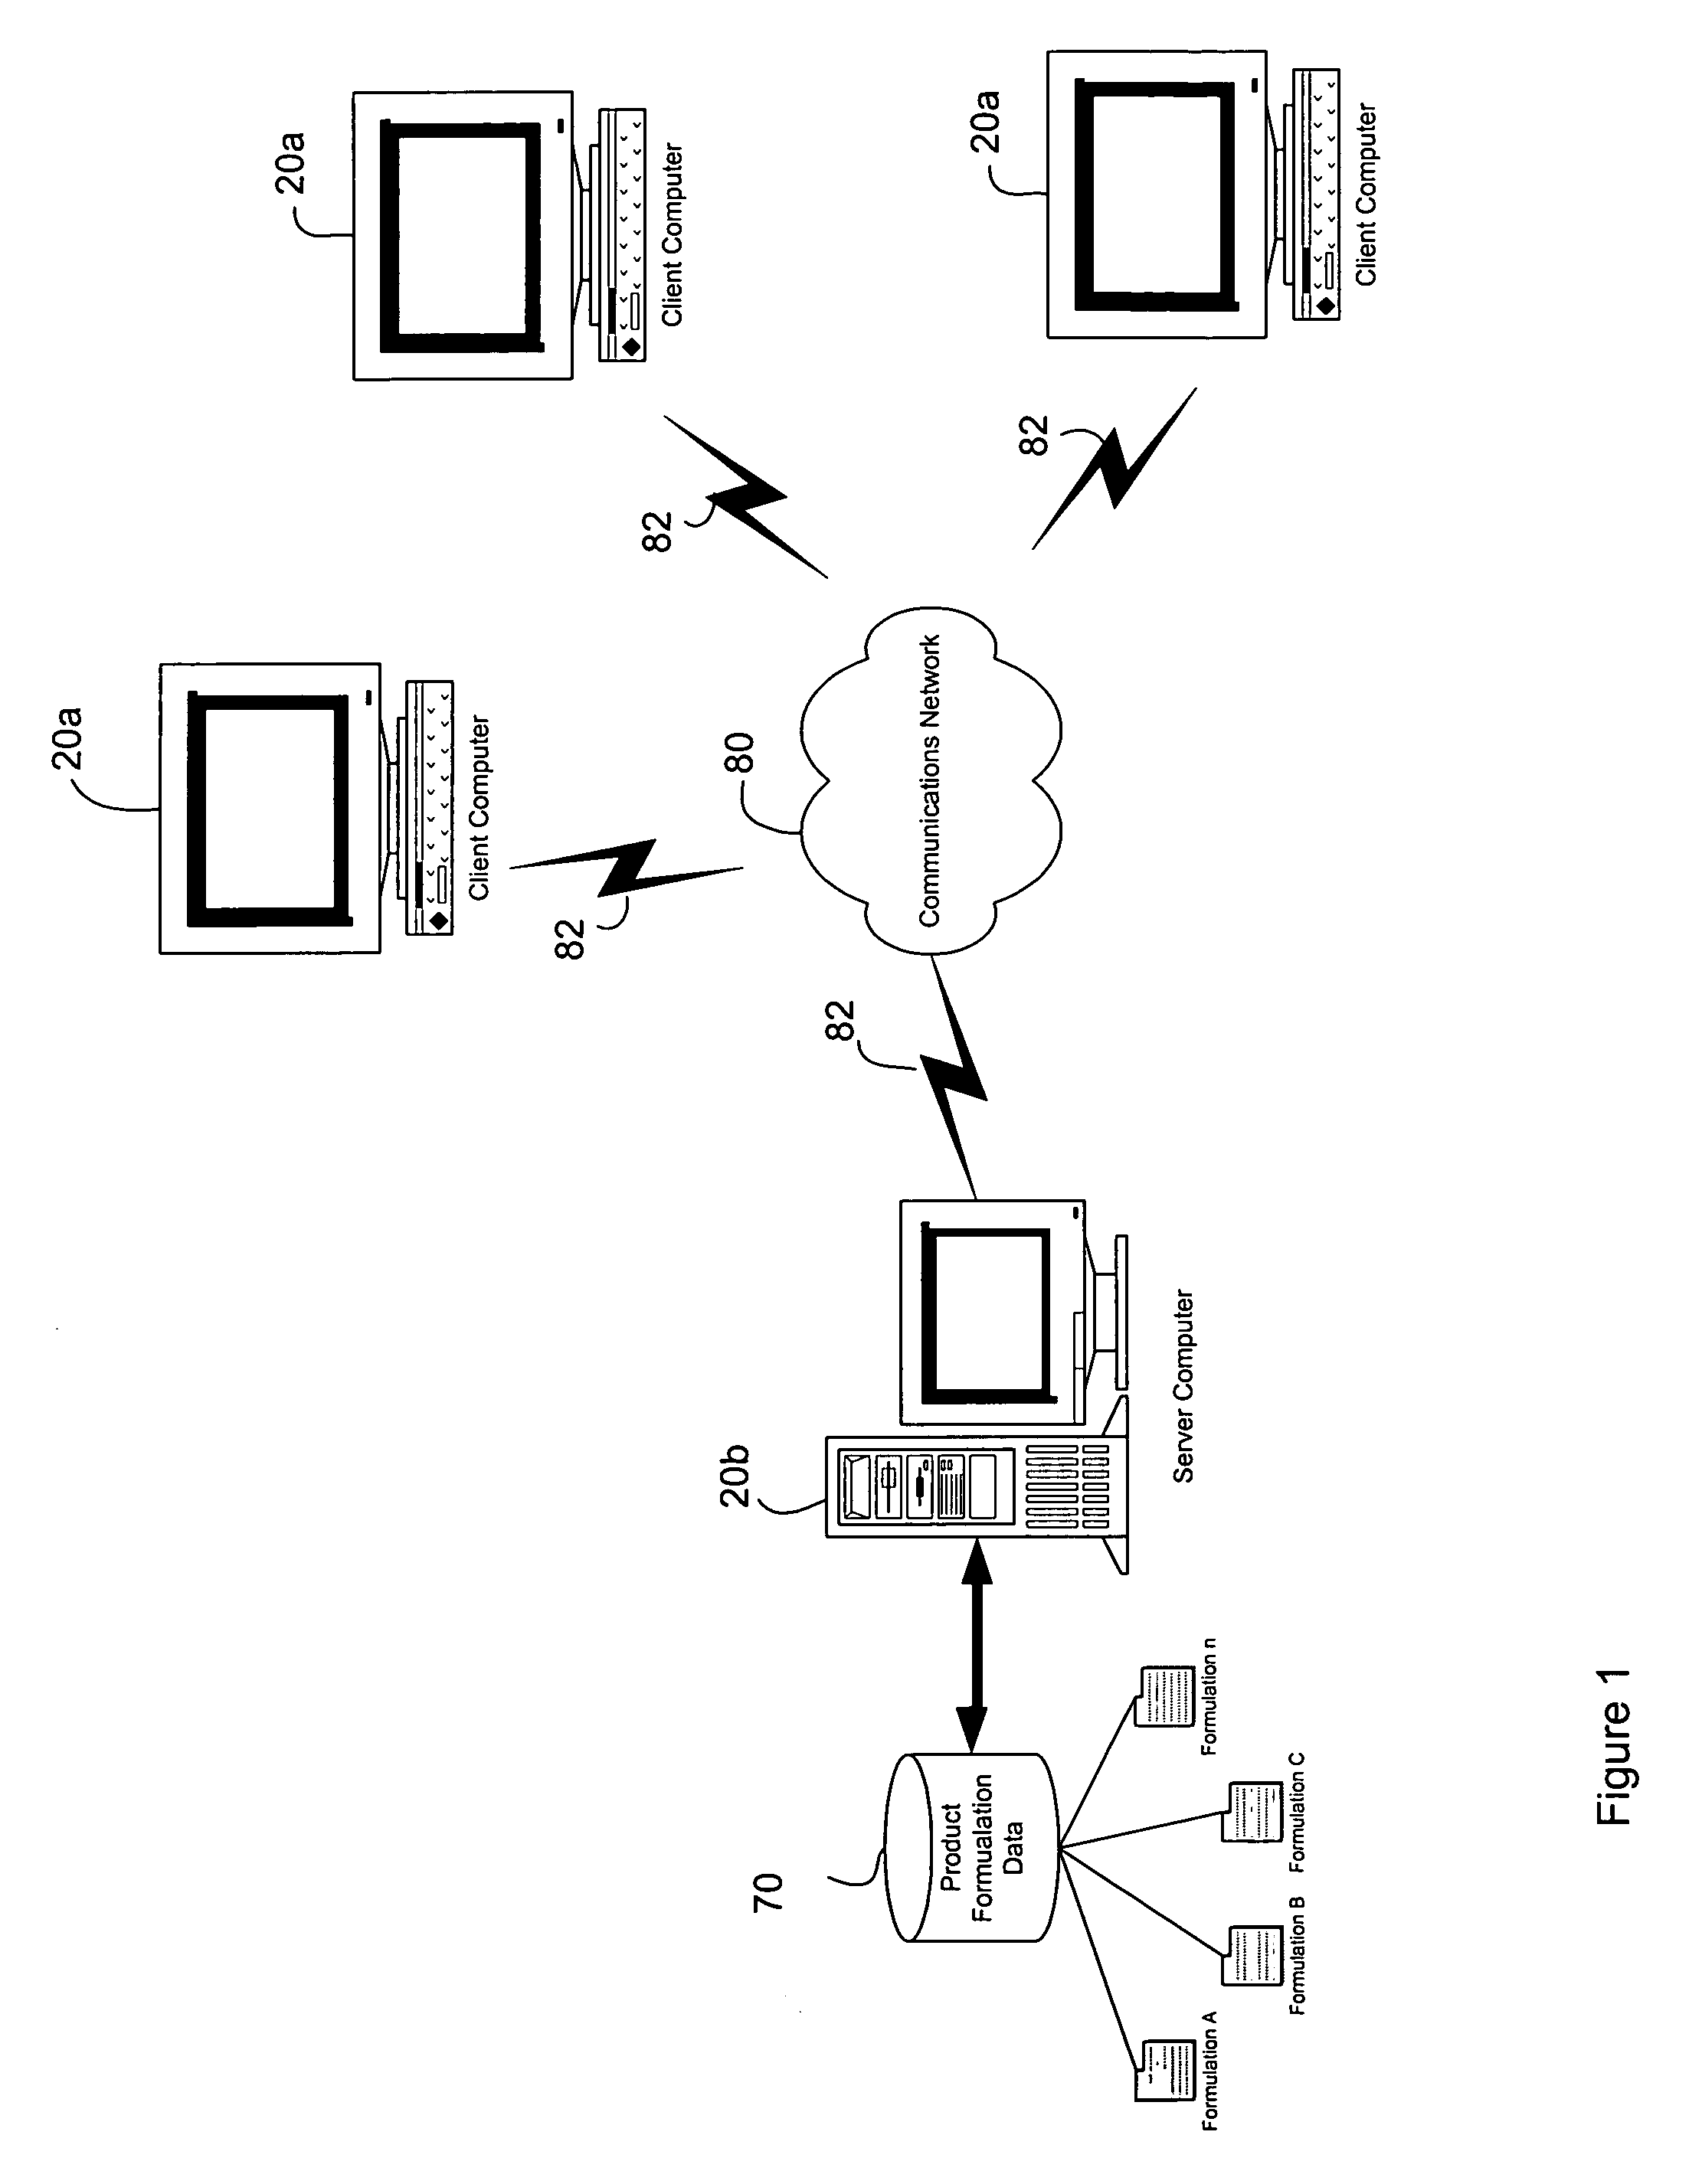 System and method for configuring products over a communications network